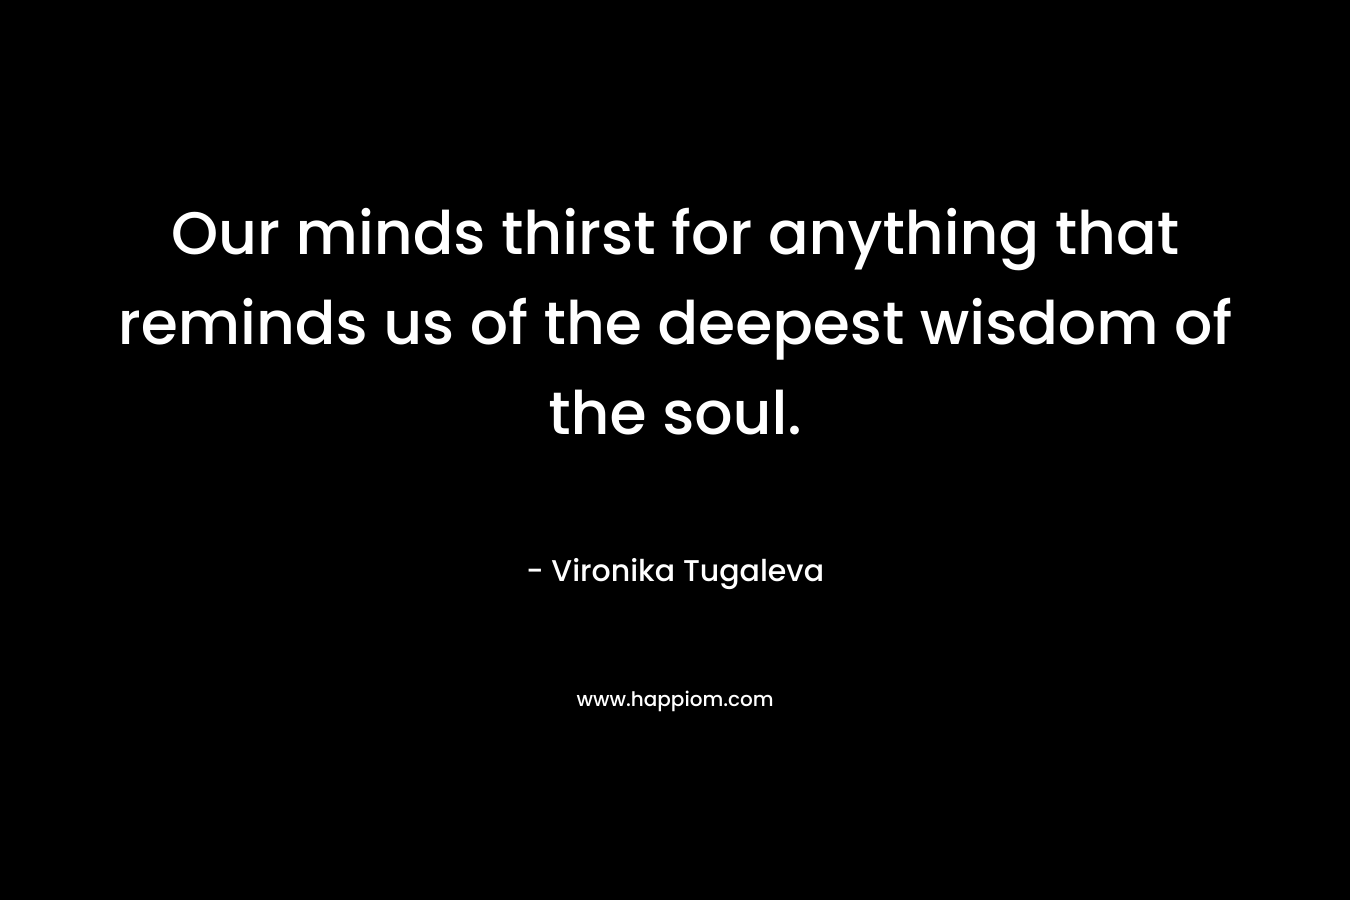 Our minds thirst for anything that reminds us of the deepest wisdom of the soul.